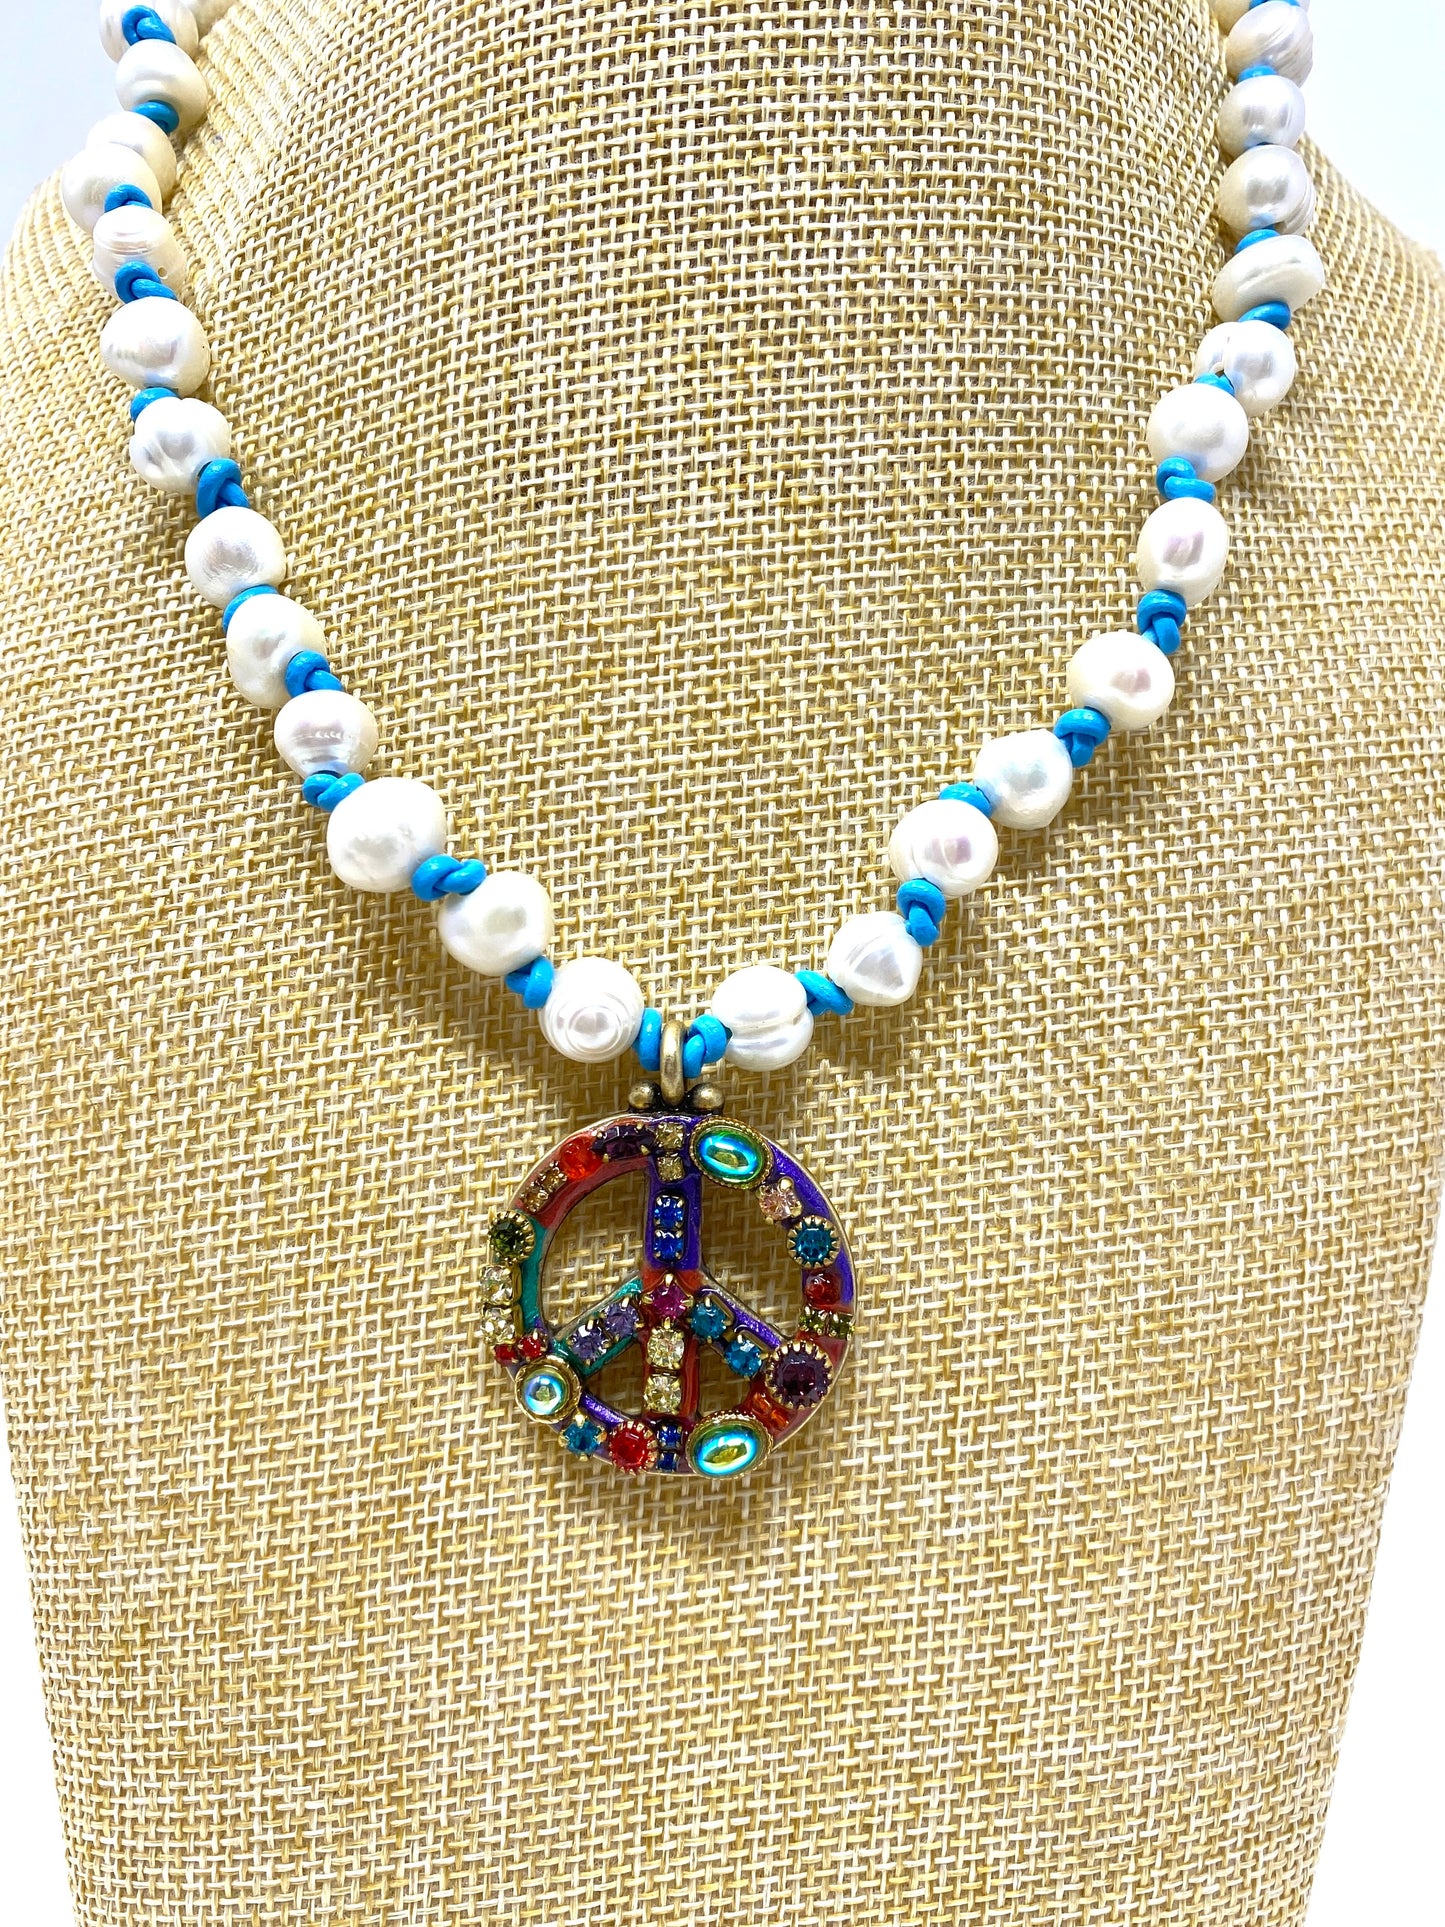 Leather Knotted Freshwater Pearl Necklace With Jeweled Peace Sign Pendant